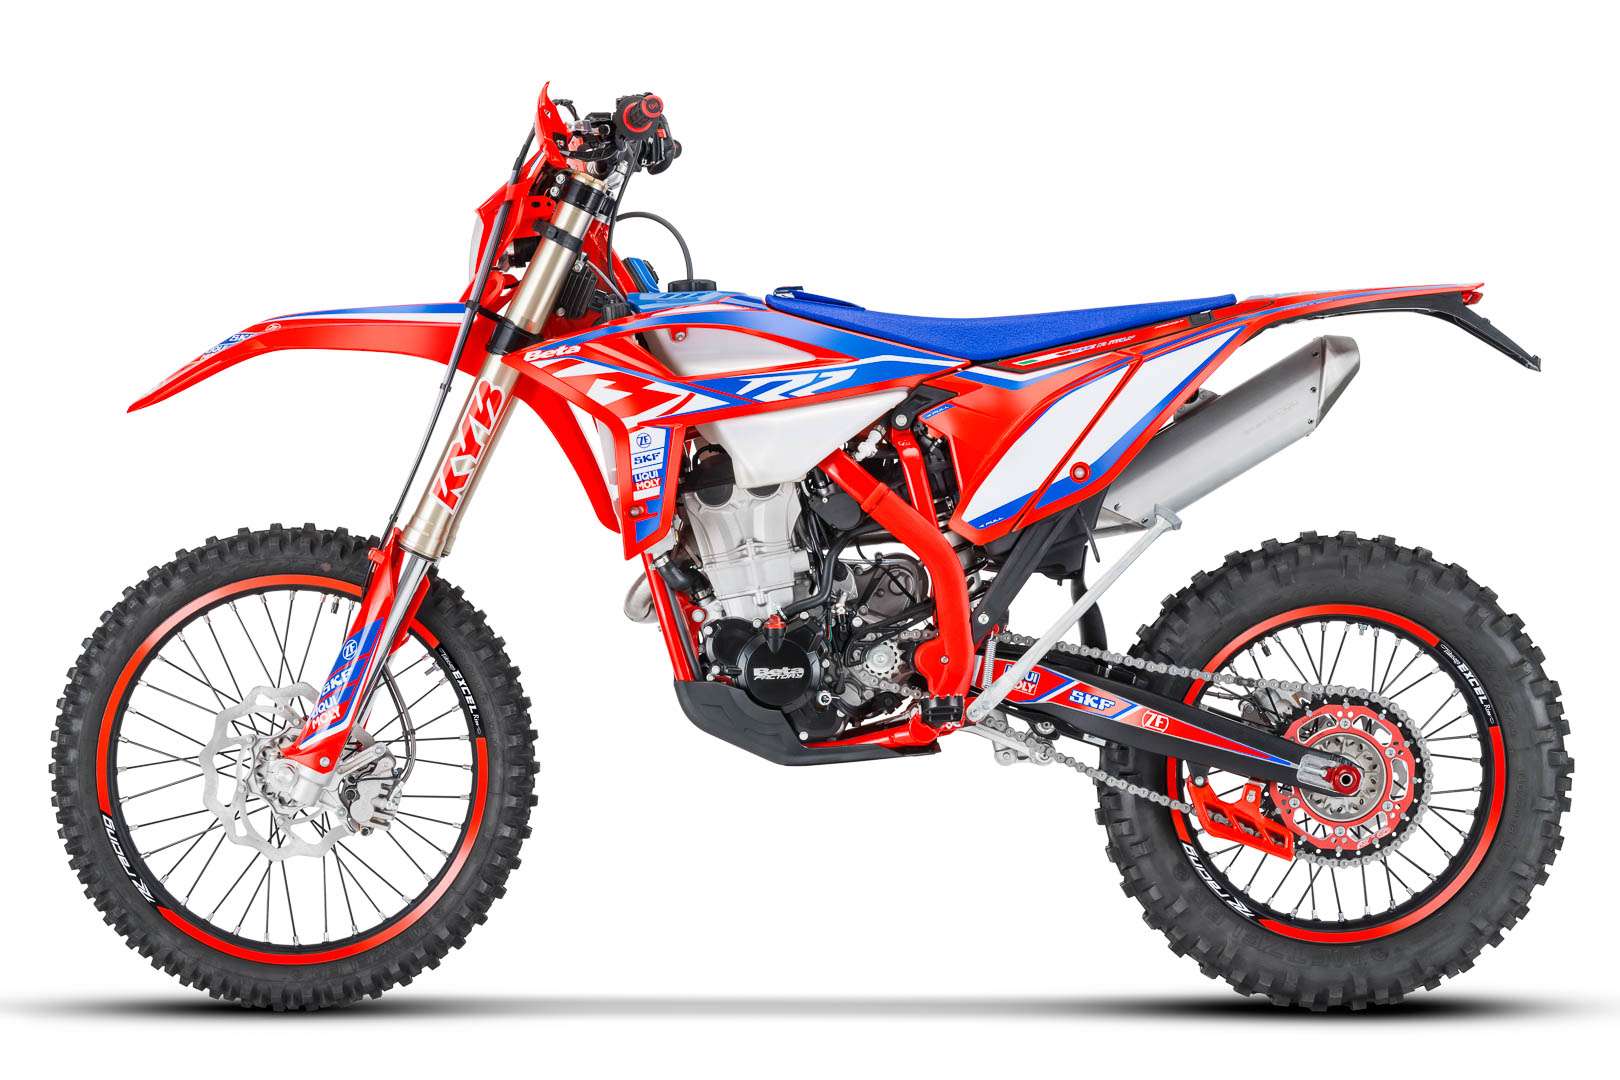 2022-beta-rr-race-edition-four-strokes-lineup-off-road-racing-motorcycles-dirt-bike-1